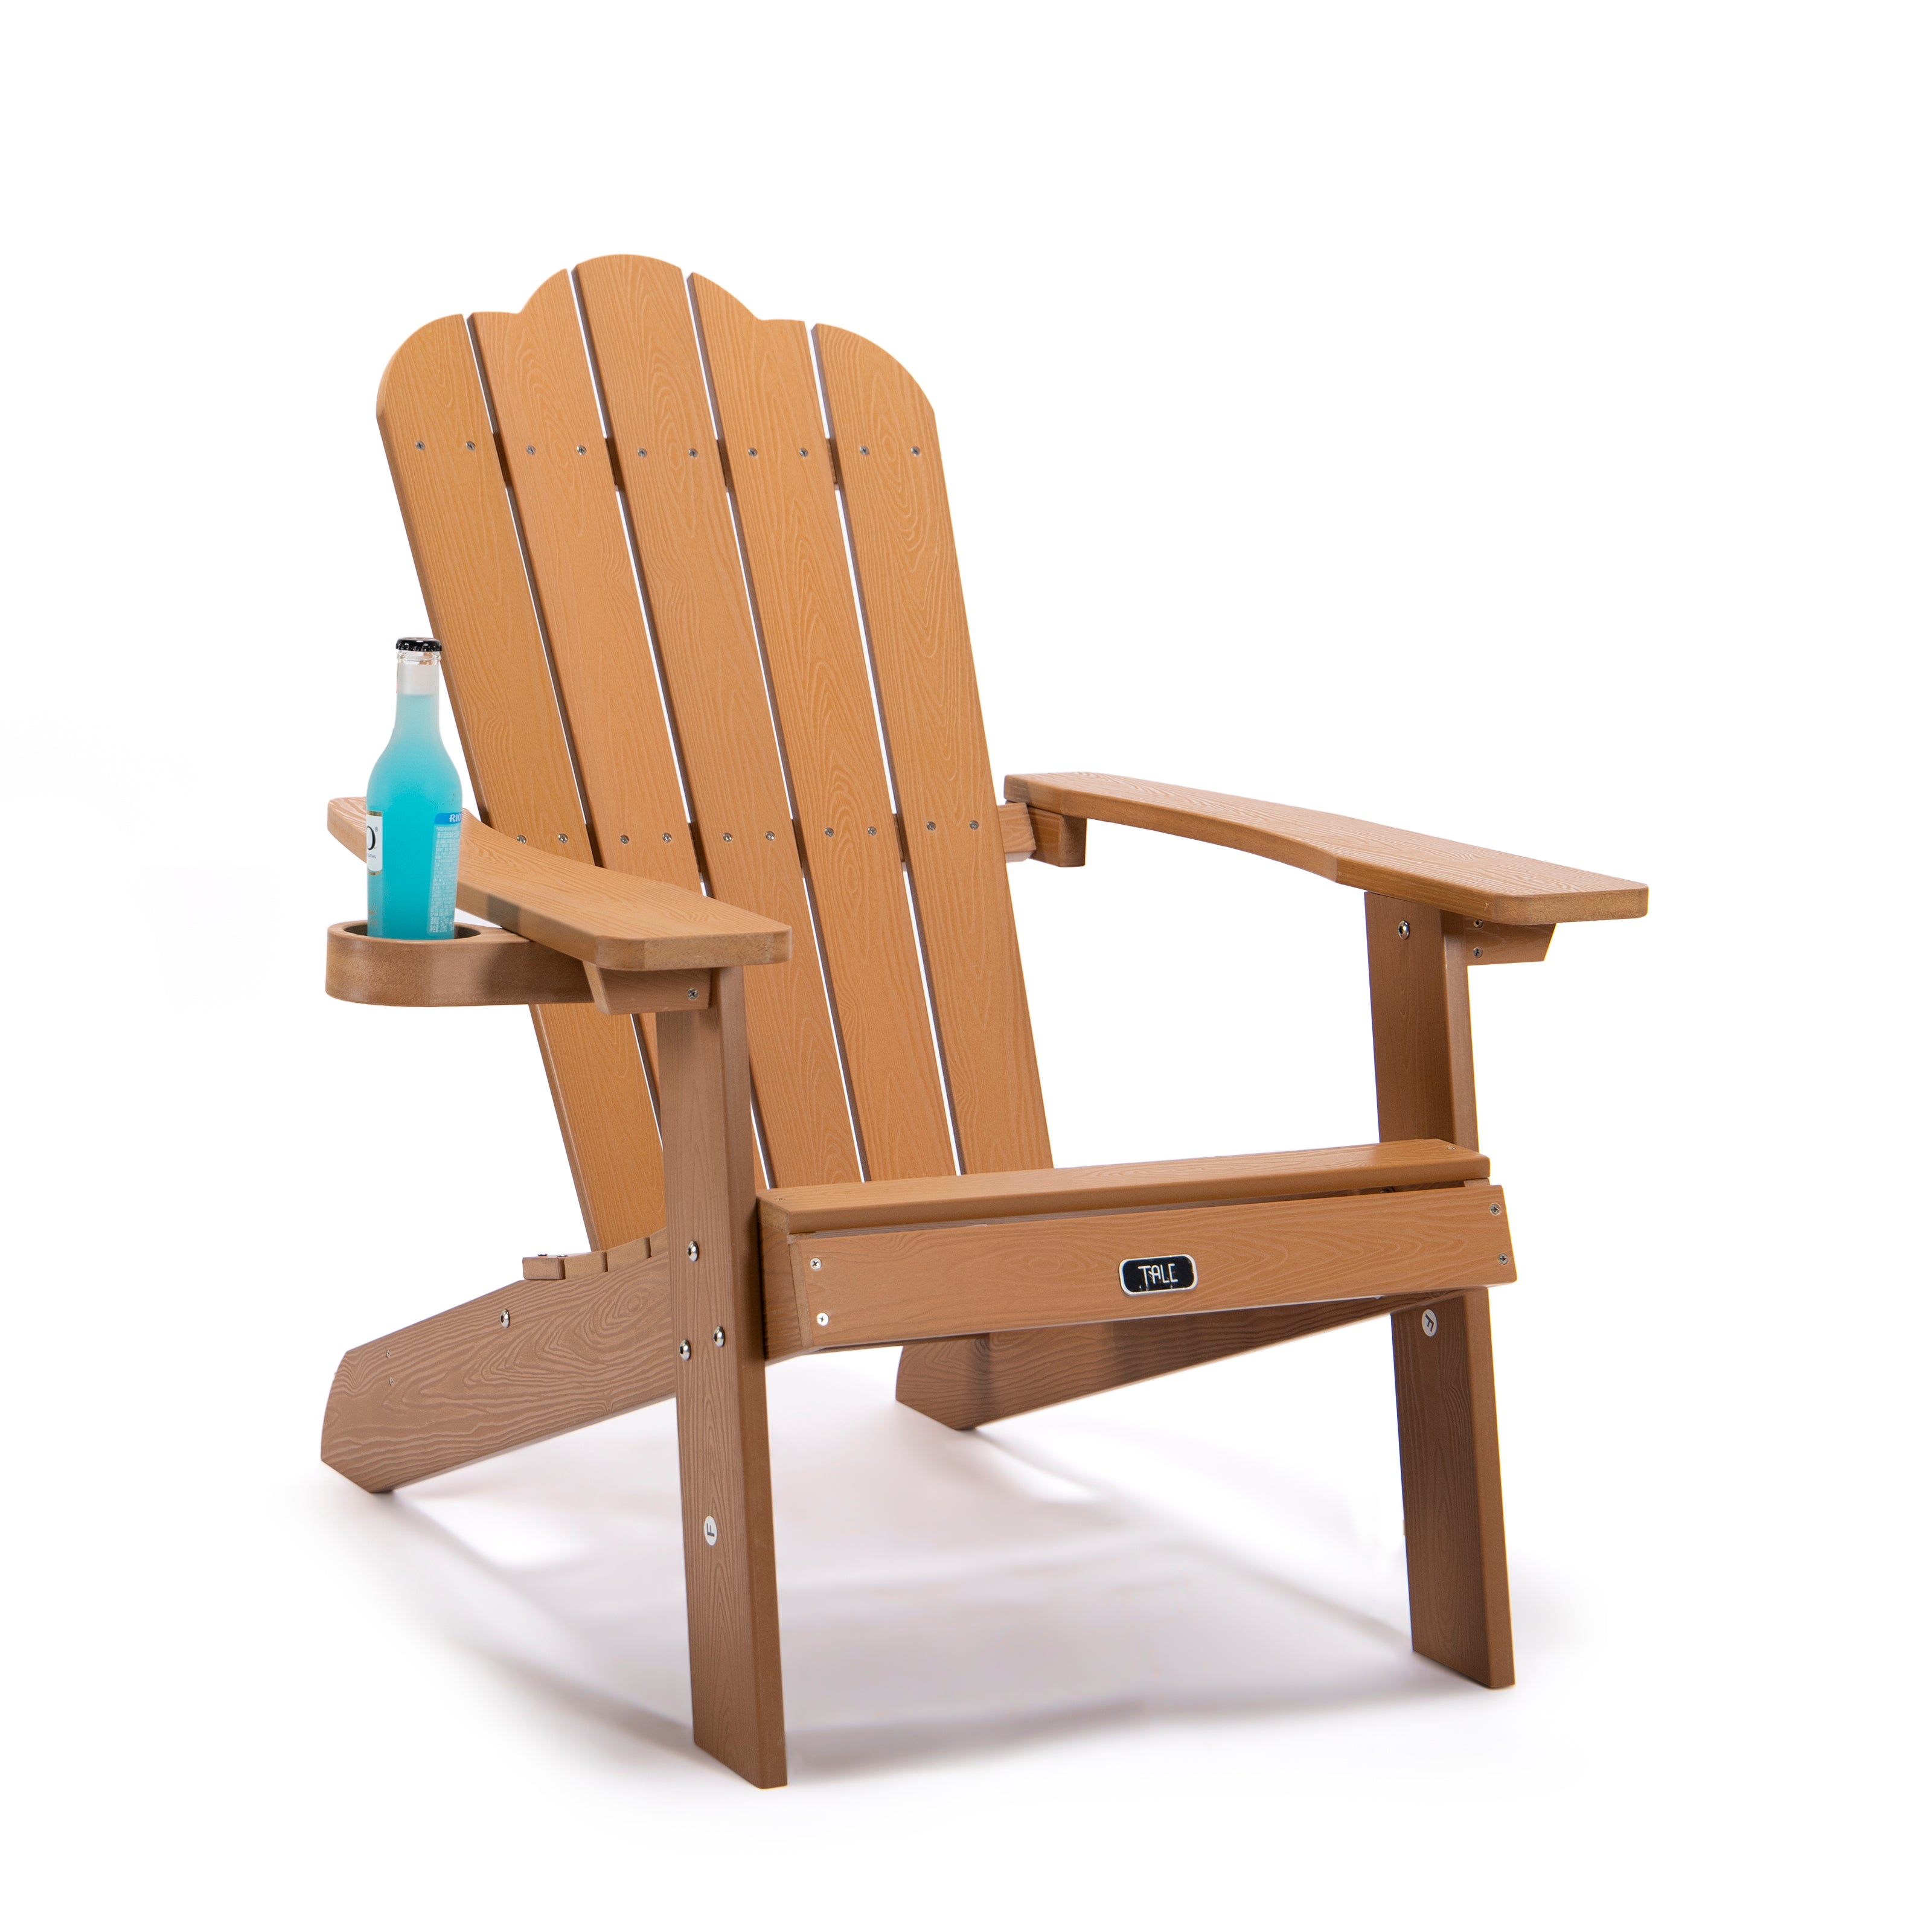 Adirondack Chair Backyard Outdoor Furniture Painted Seating With Cup Holder All-Weather And Fade-Resistant